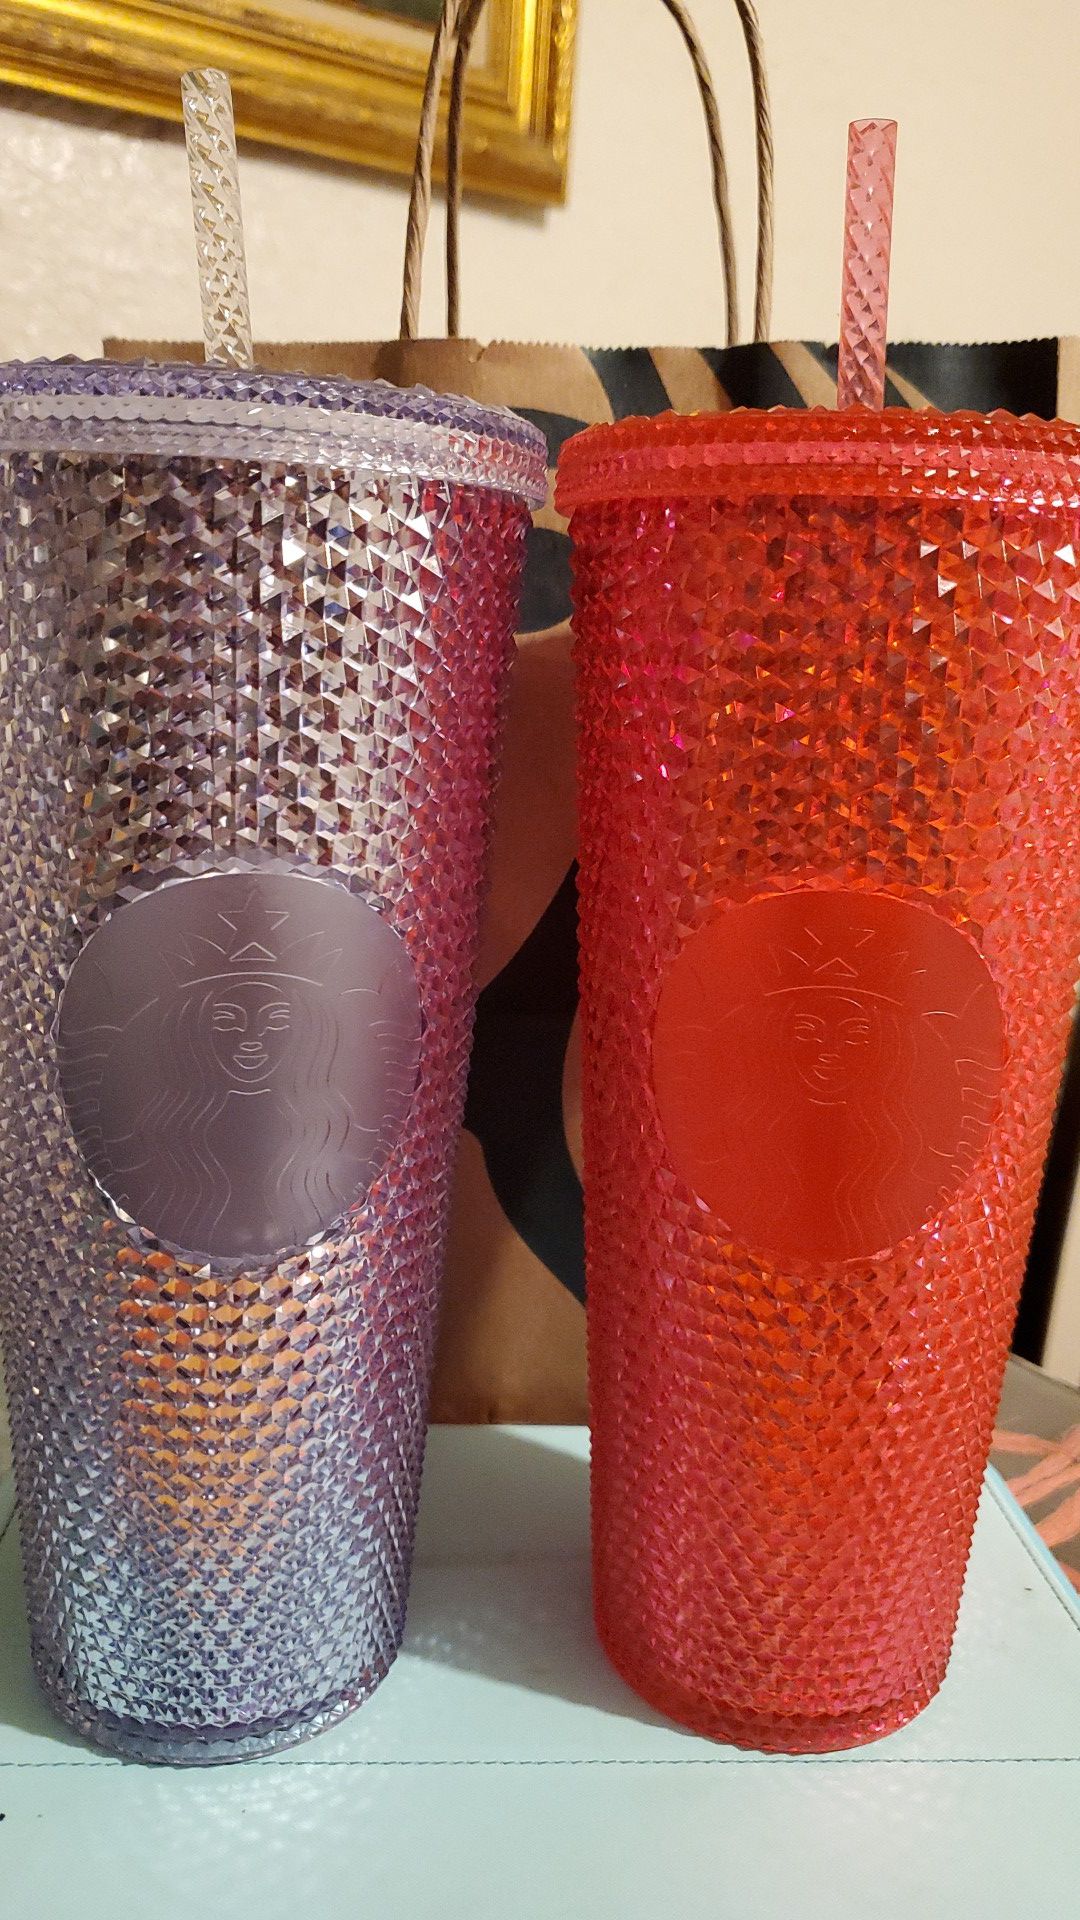 NEW STARBUCKS LIMITED EDITION CUPS